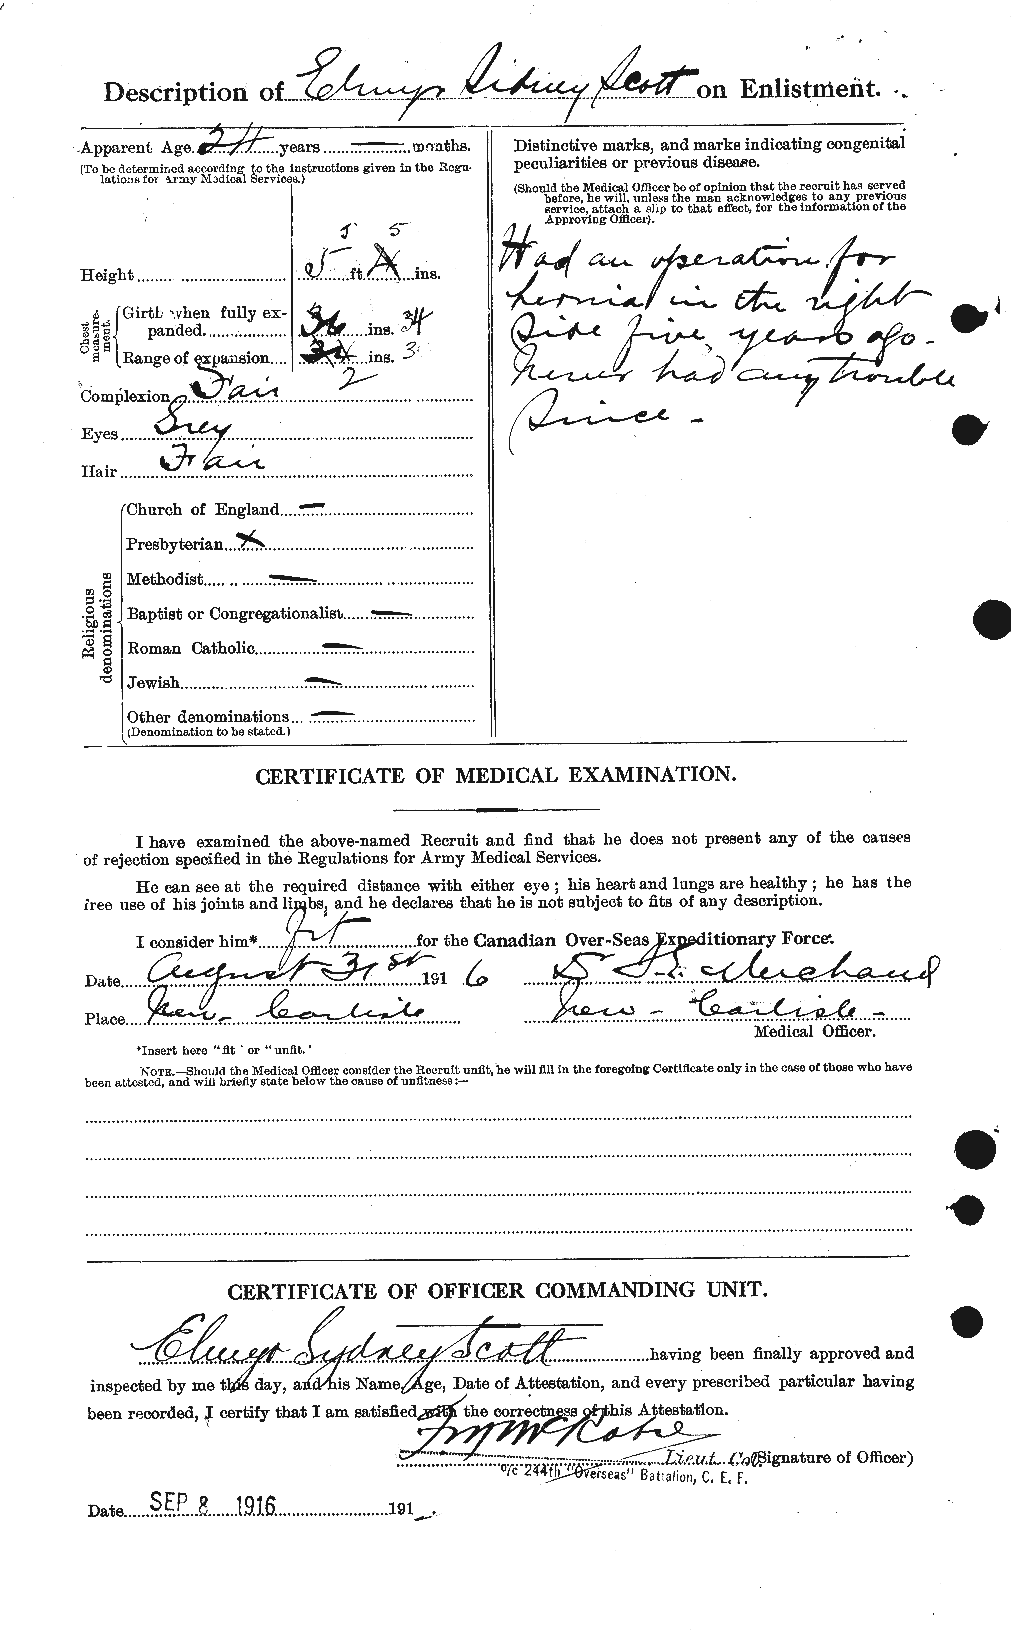 Personnel Records of the First World War - CEF 085032b